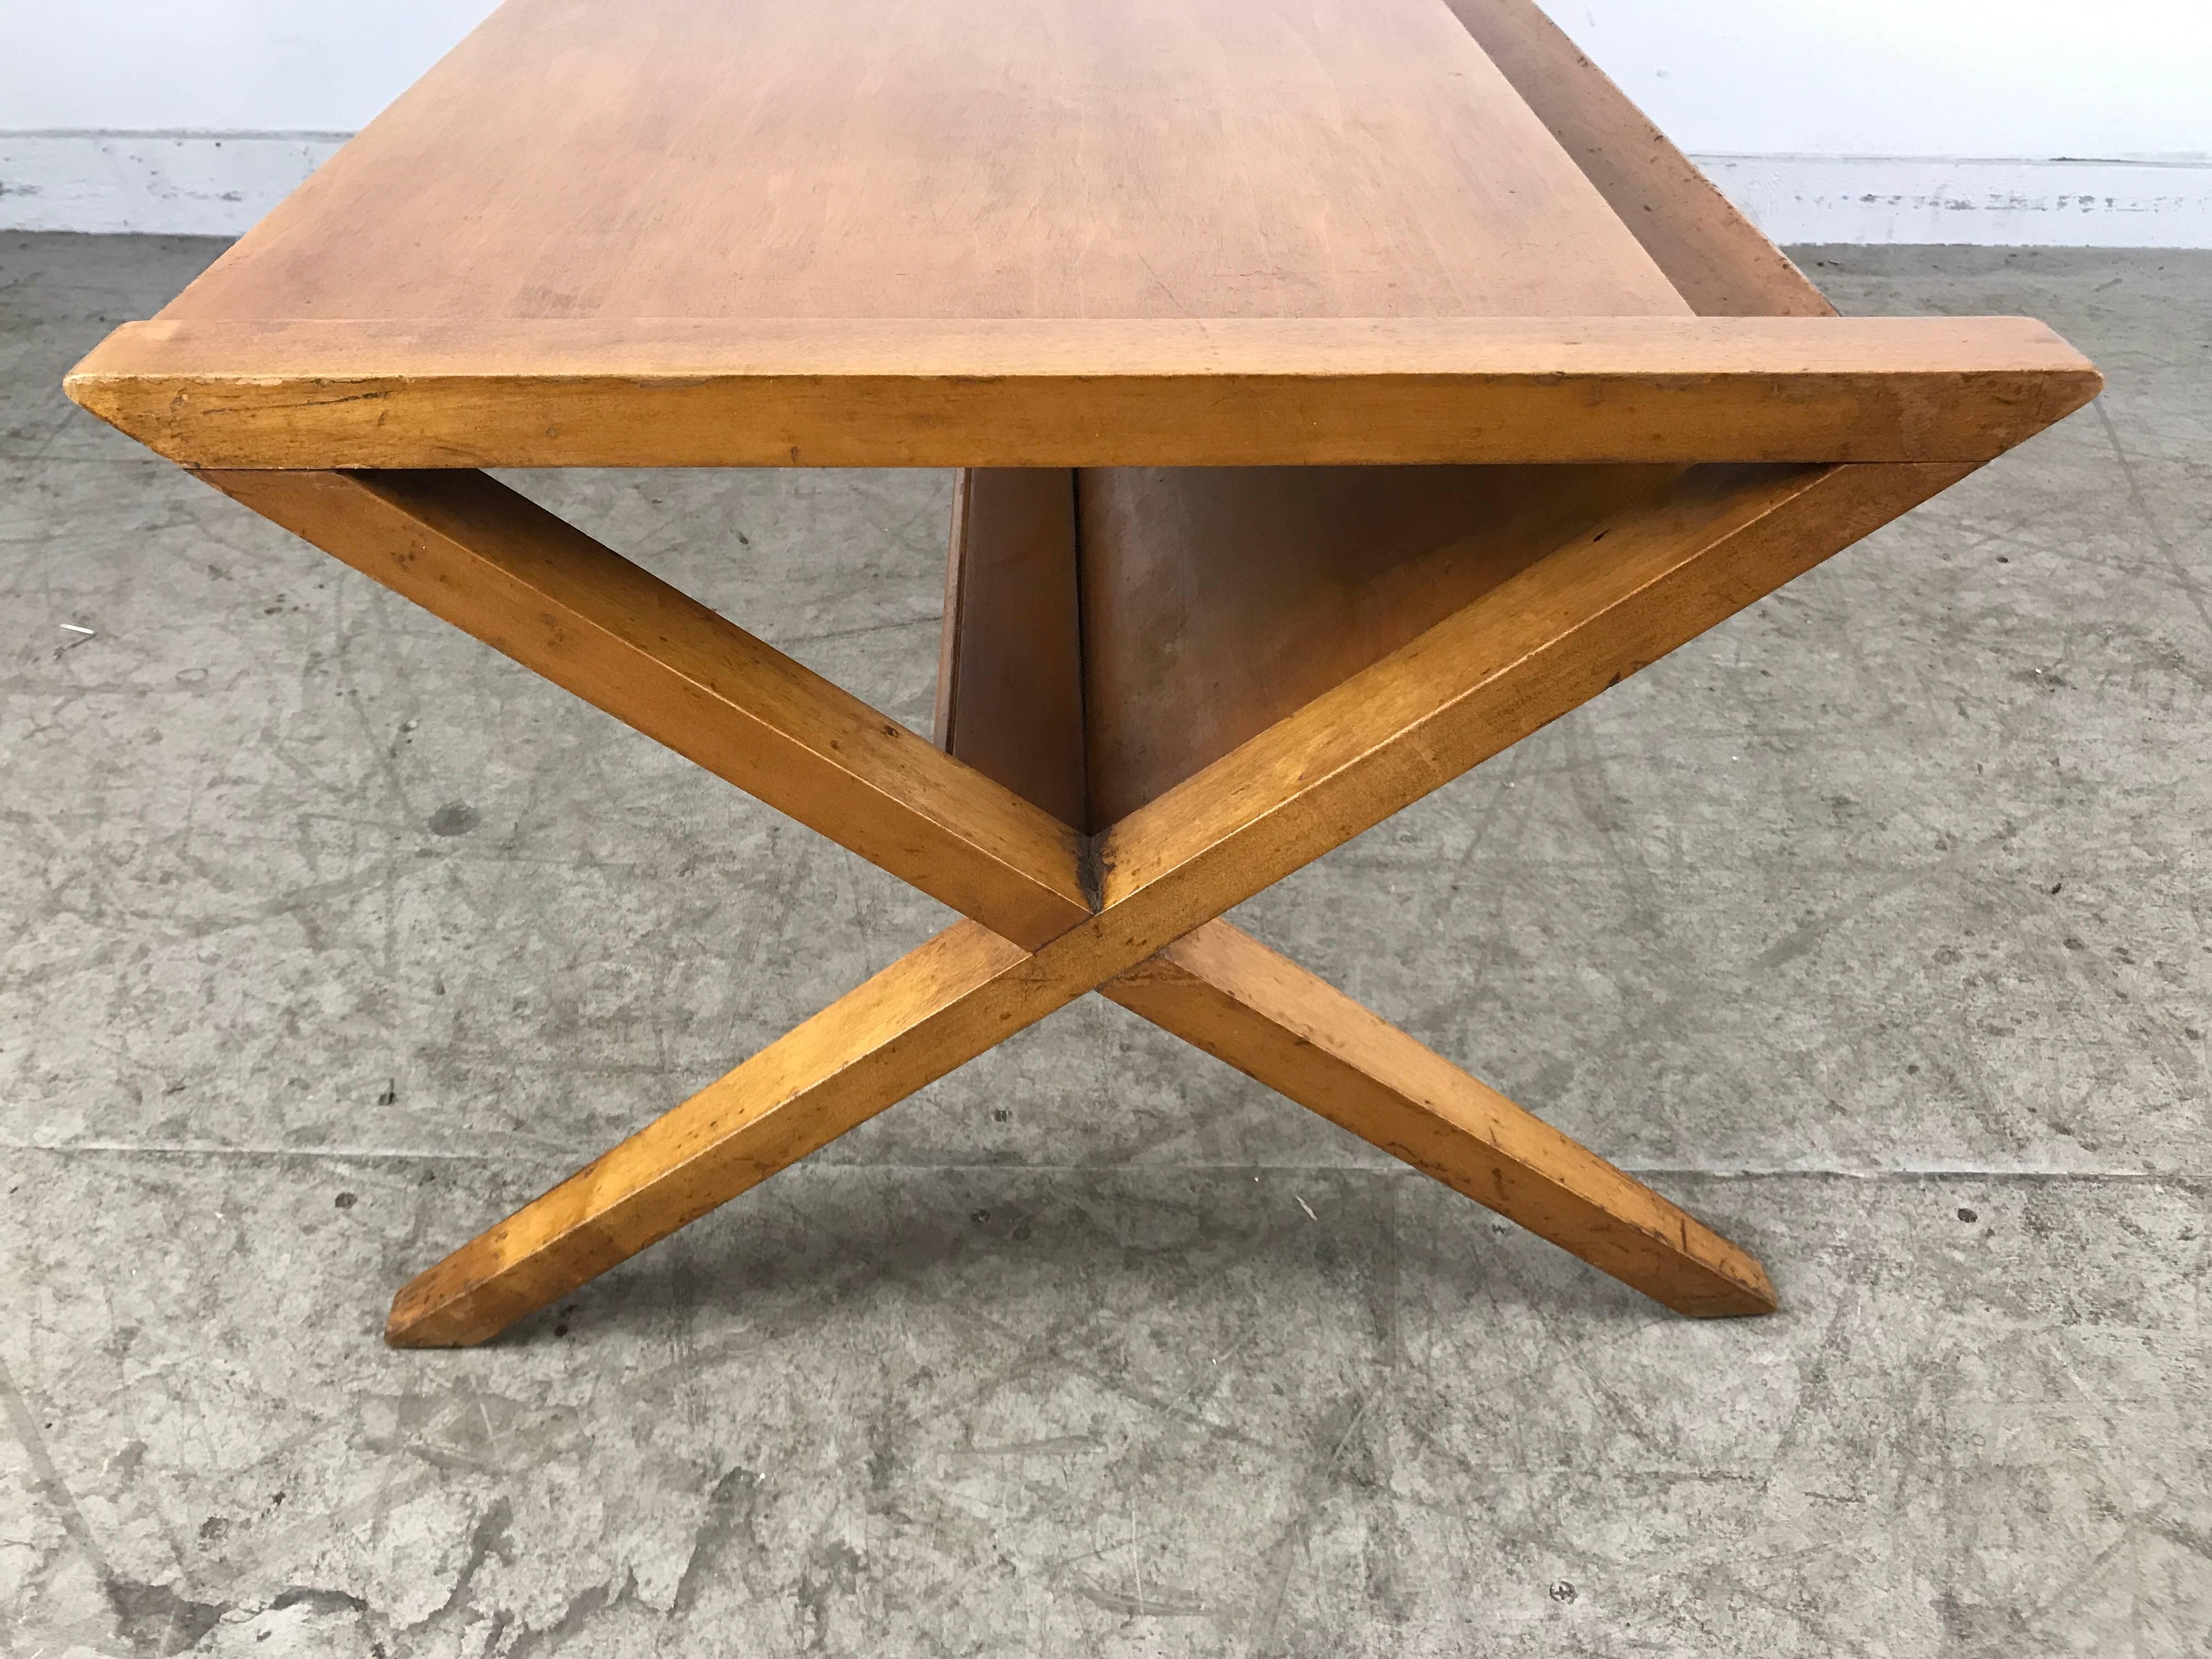 Modernist Blonde Mahogany Coffee / Magazine Table, X-Sides, Robsjohn In Good Condition For Sale In Buffalo, NY